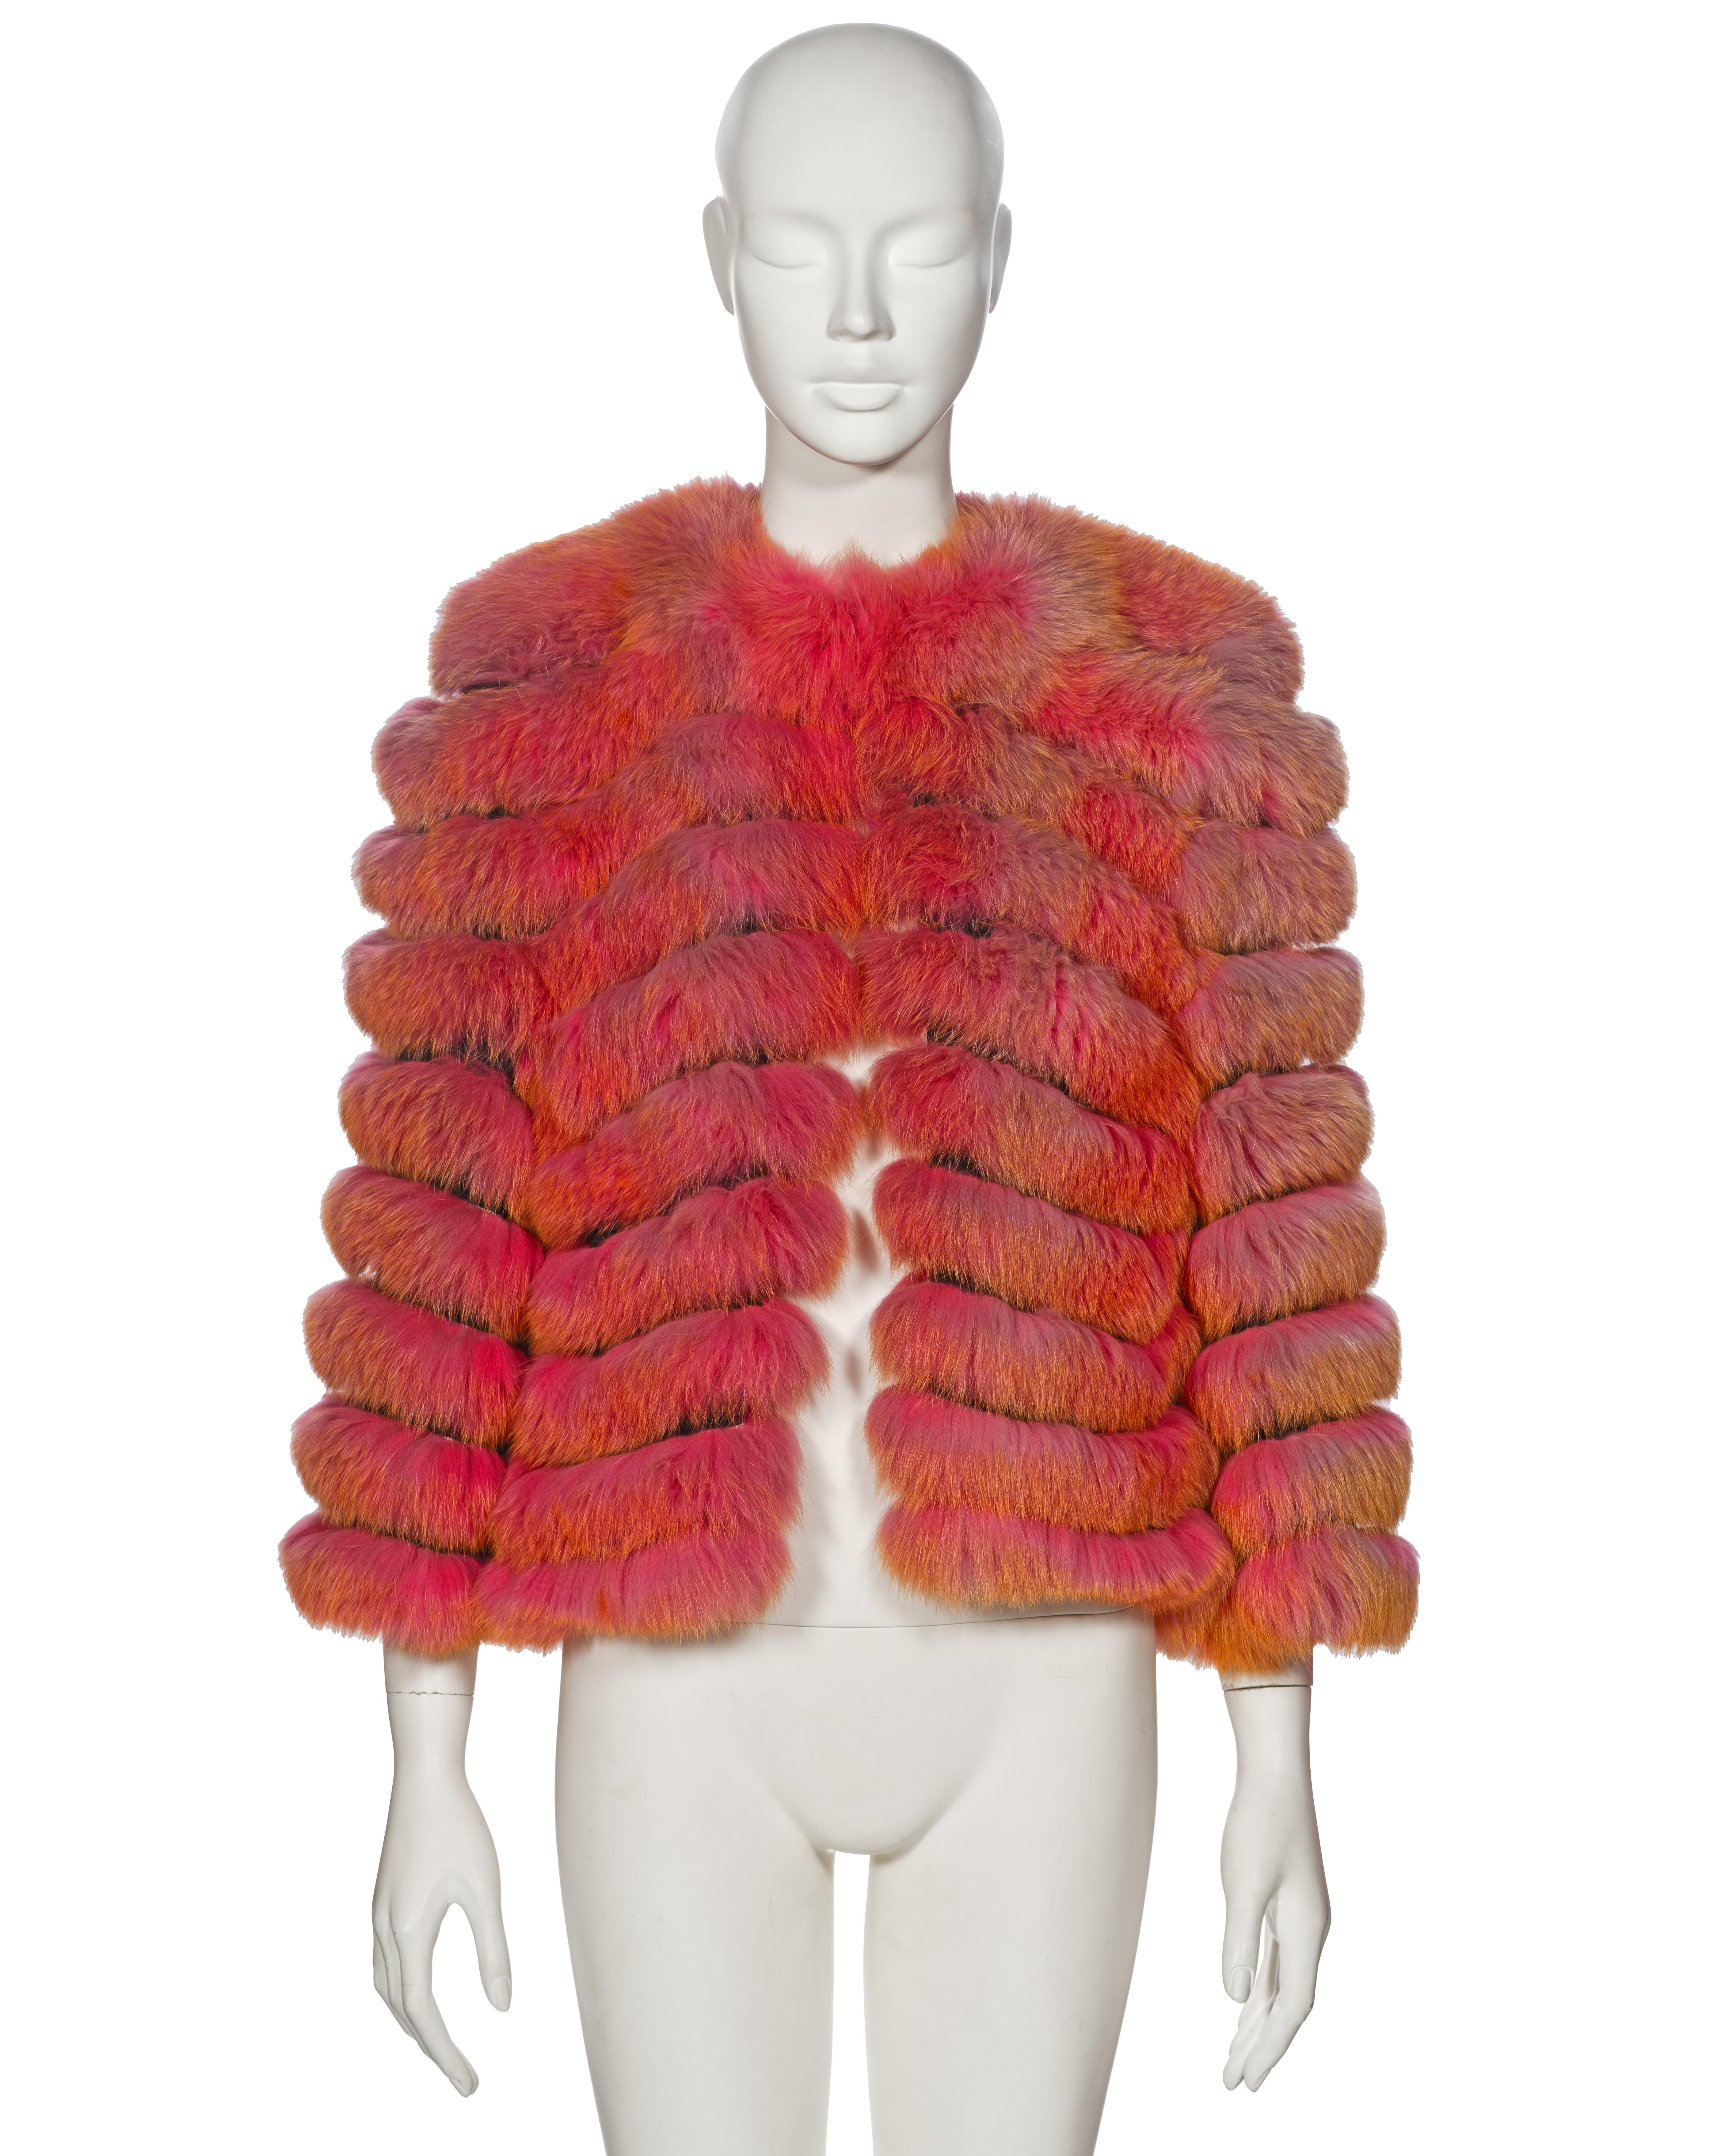 ▪ Archival Dolce & Gabbana Fox Fur Jacket 
▪ Fall-Winter 1999
▪ Sold by One of a Kind Archive  
▪ Meticulously crafted from luxurious fox fur ribbons featuring a captivating pink-to-orange gradient coloration
▪ Secured with a single front